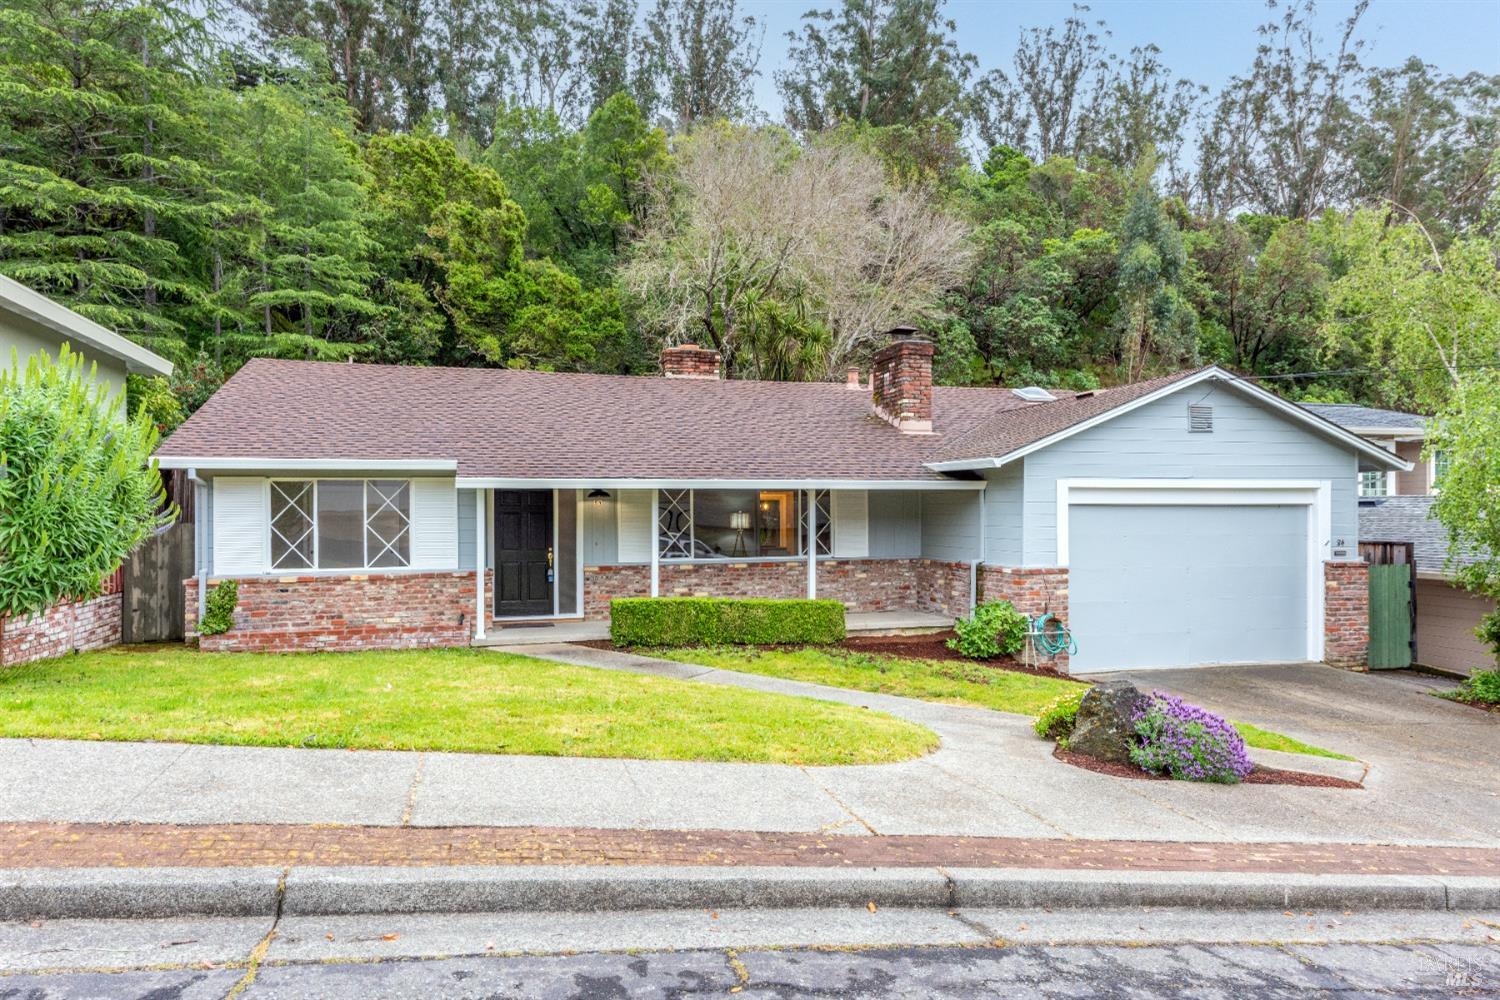 Tucked away in the sought-after Marinda Oaks neighborhood, this charming single-level home instantly wraps you in its cozy embrace the moment you walk through the front door. With its classic ranch style, it boasts newly refinished hardwood floors, fresh paint inside and out, and brand-new carpet in the family room.  Indulge in the warmth of one of the two fireplaces, conveniently situated in both the living room and the family room. Adjacent to the family room lies the inviting dining area, seamlessly connected to the backyard. The expansive backyard, adorned with mature trees, provides an ideal setting for entertaining guests, unwinding, or simply embracing the beauty of nature.  Featuring three bedrooms, two full bathrooms, and a separate large laundry/mud room with plenty of storage, this home combines comfort and convenience effortlessly. Unwind by indulging in a steam shower experience in the primary bathroom. Just steps away awaits downtown Fairfax, where you can immerse yourself in a dynamic nightlife scene, savor mouthwatering cuisine, enjoy a movie night out, or explore the bustling farmers' markets. It's no wonder Marinda Oaks holds a special place in the hearts of its residents!